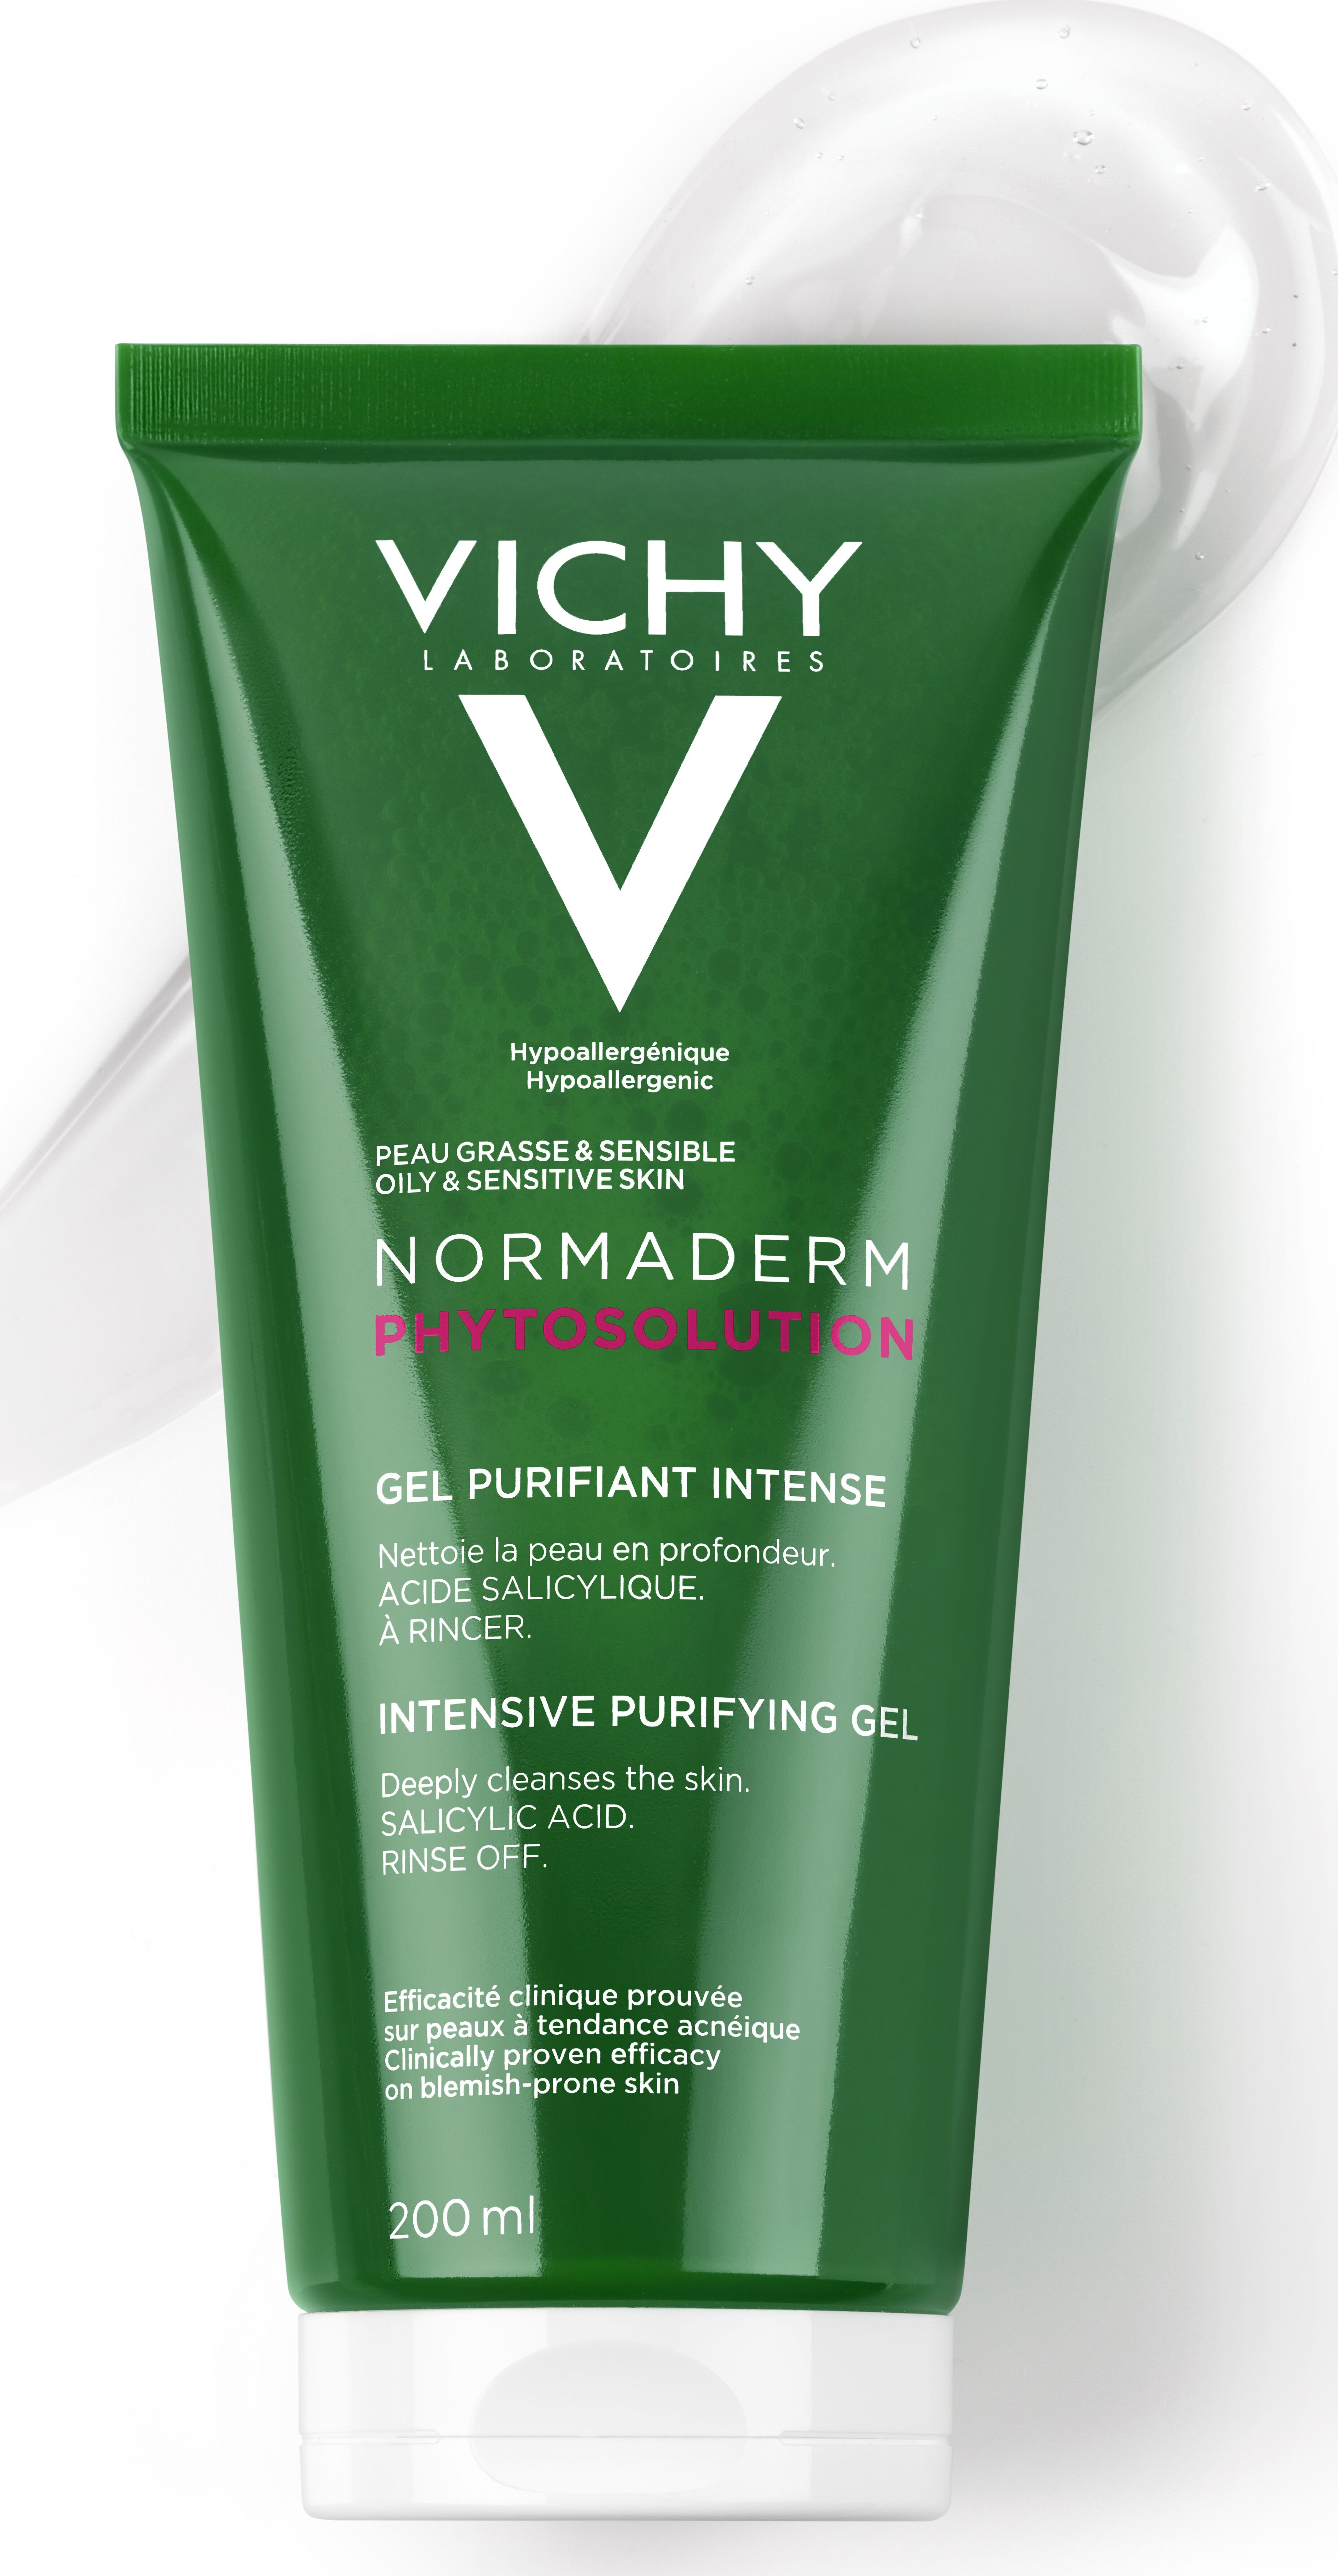 Vichy Normaderm phytosolution. Vichy Normaderm Gel purifiant intense. Vichy Normaderm phytosolution 15 капсул. Vichy Normaderm Gel purifiant intense Intensive Purifying Gel. Vichy normaderm phytosolution intensive purifying gel